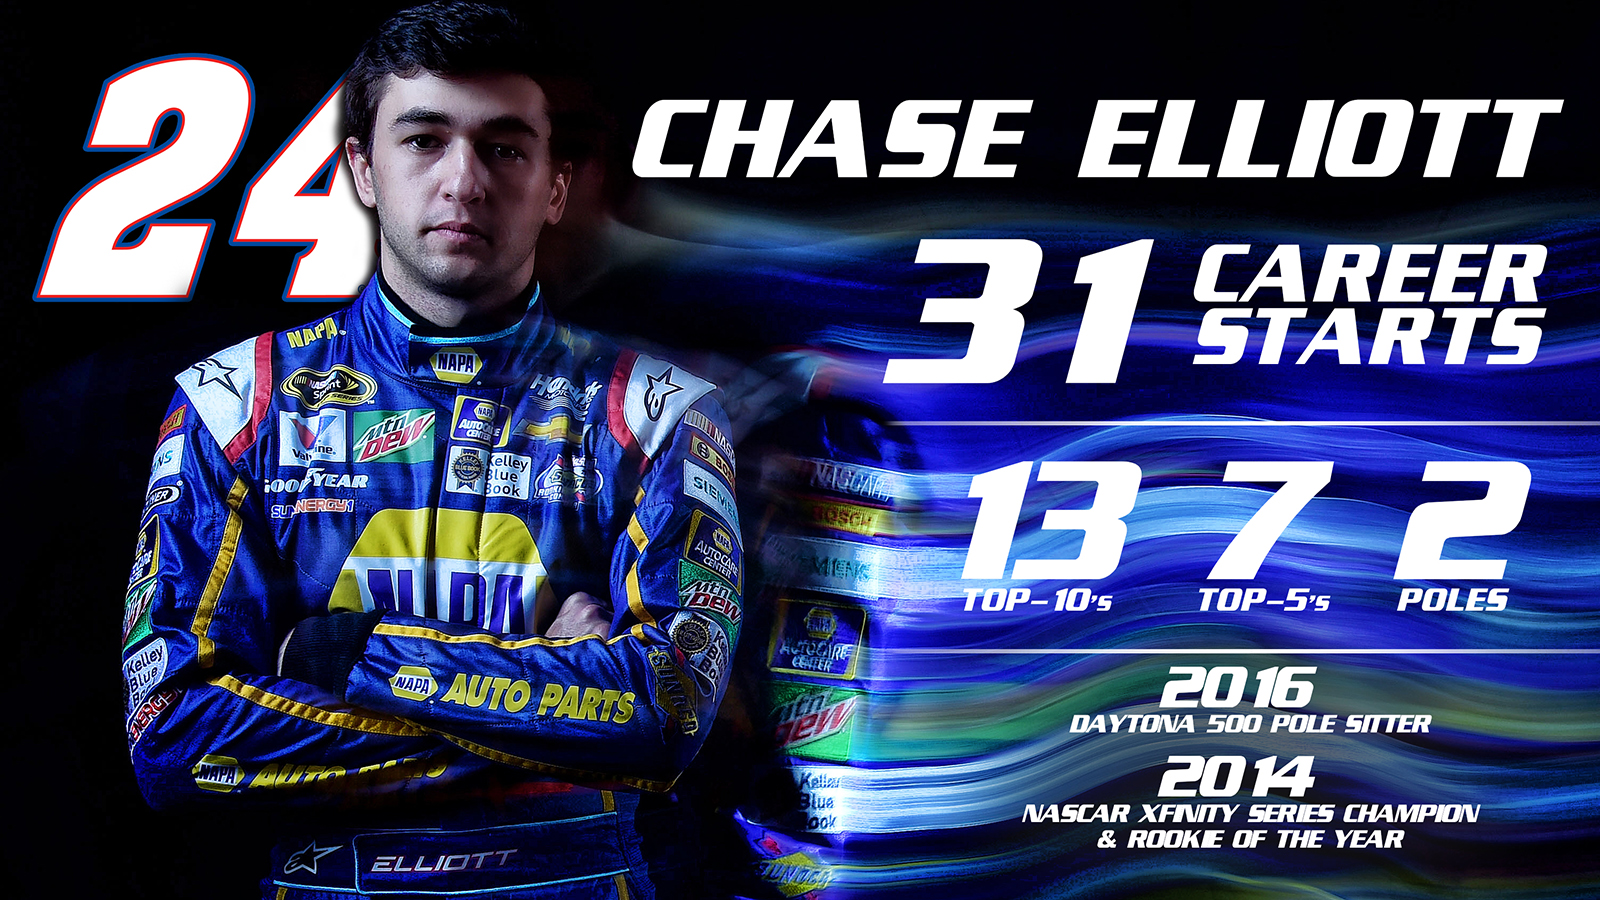 There’s been a lot of talk around Chase Elliott’s rookie season. 